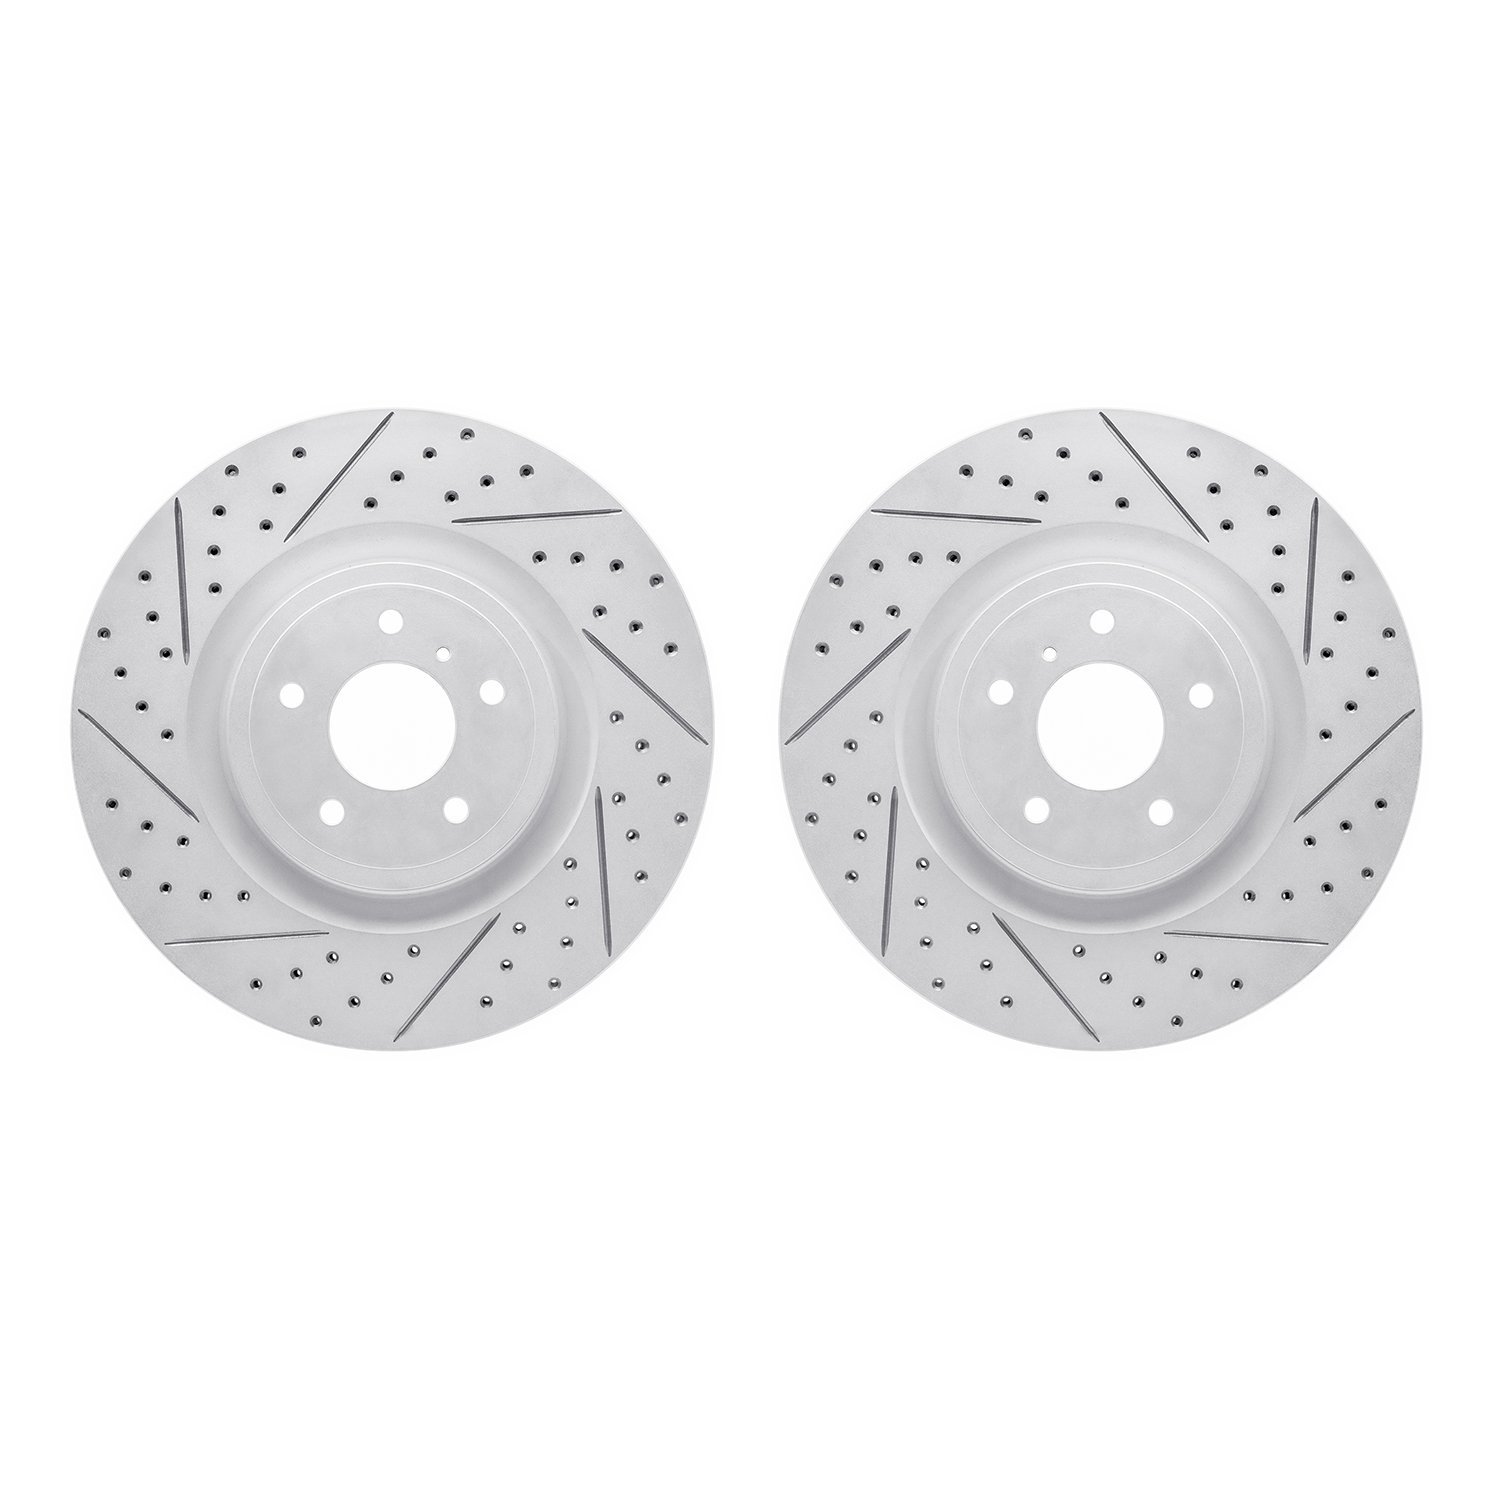 2002-68001 Geoperformance Drilled/Slotted Brake Rotors, Fits Select Infiniti/Nissan, Position: Front